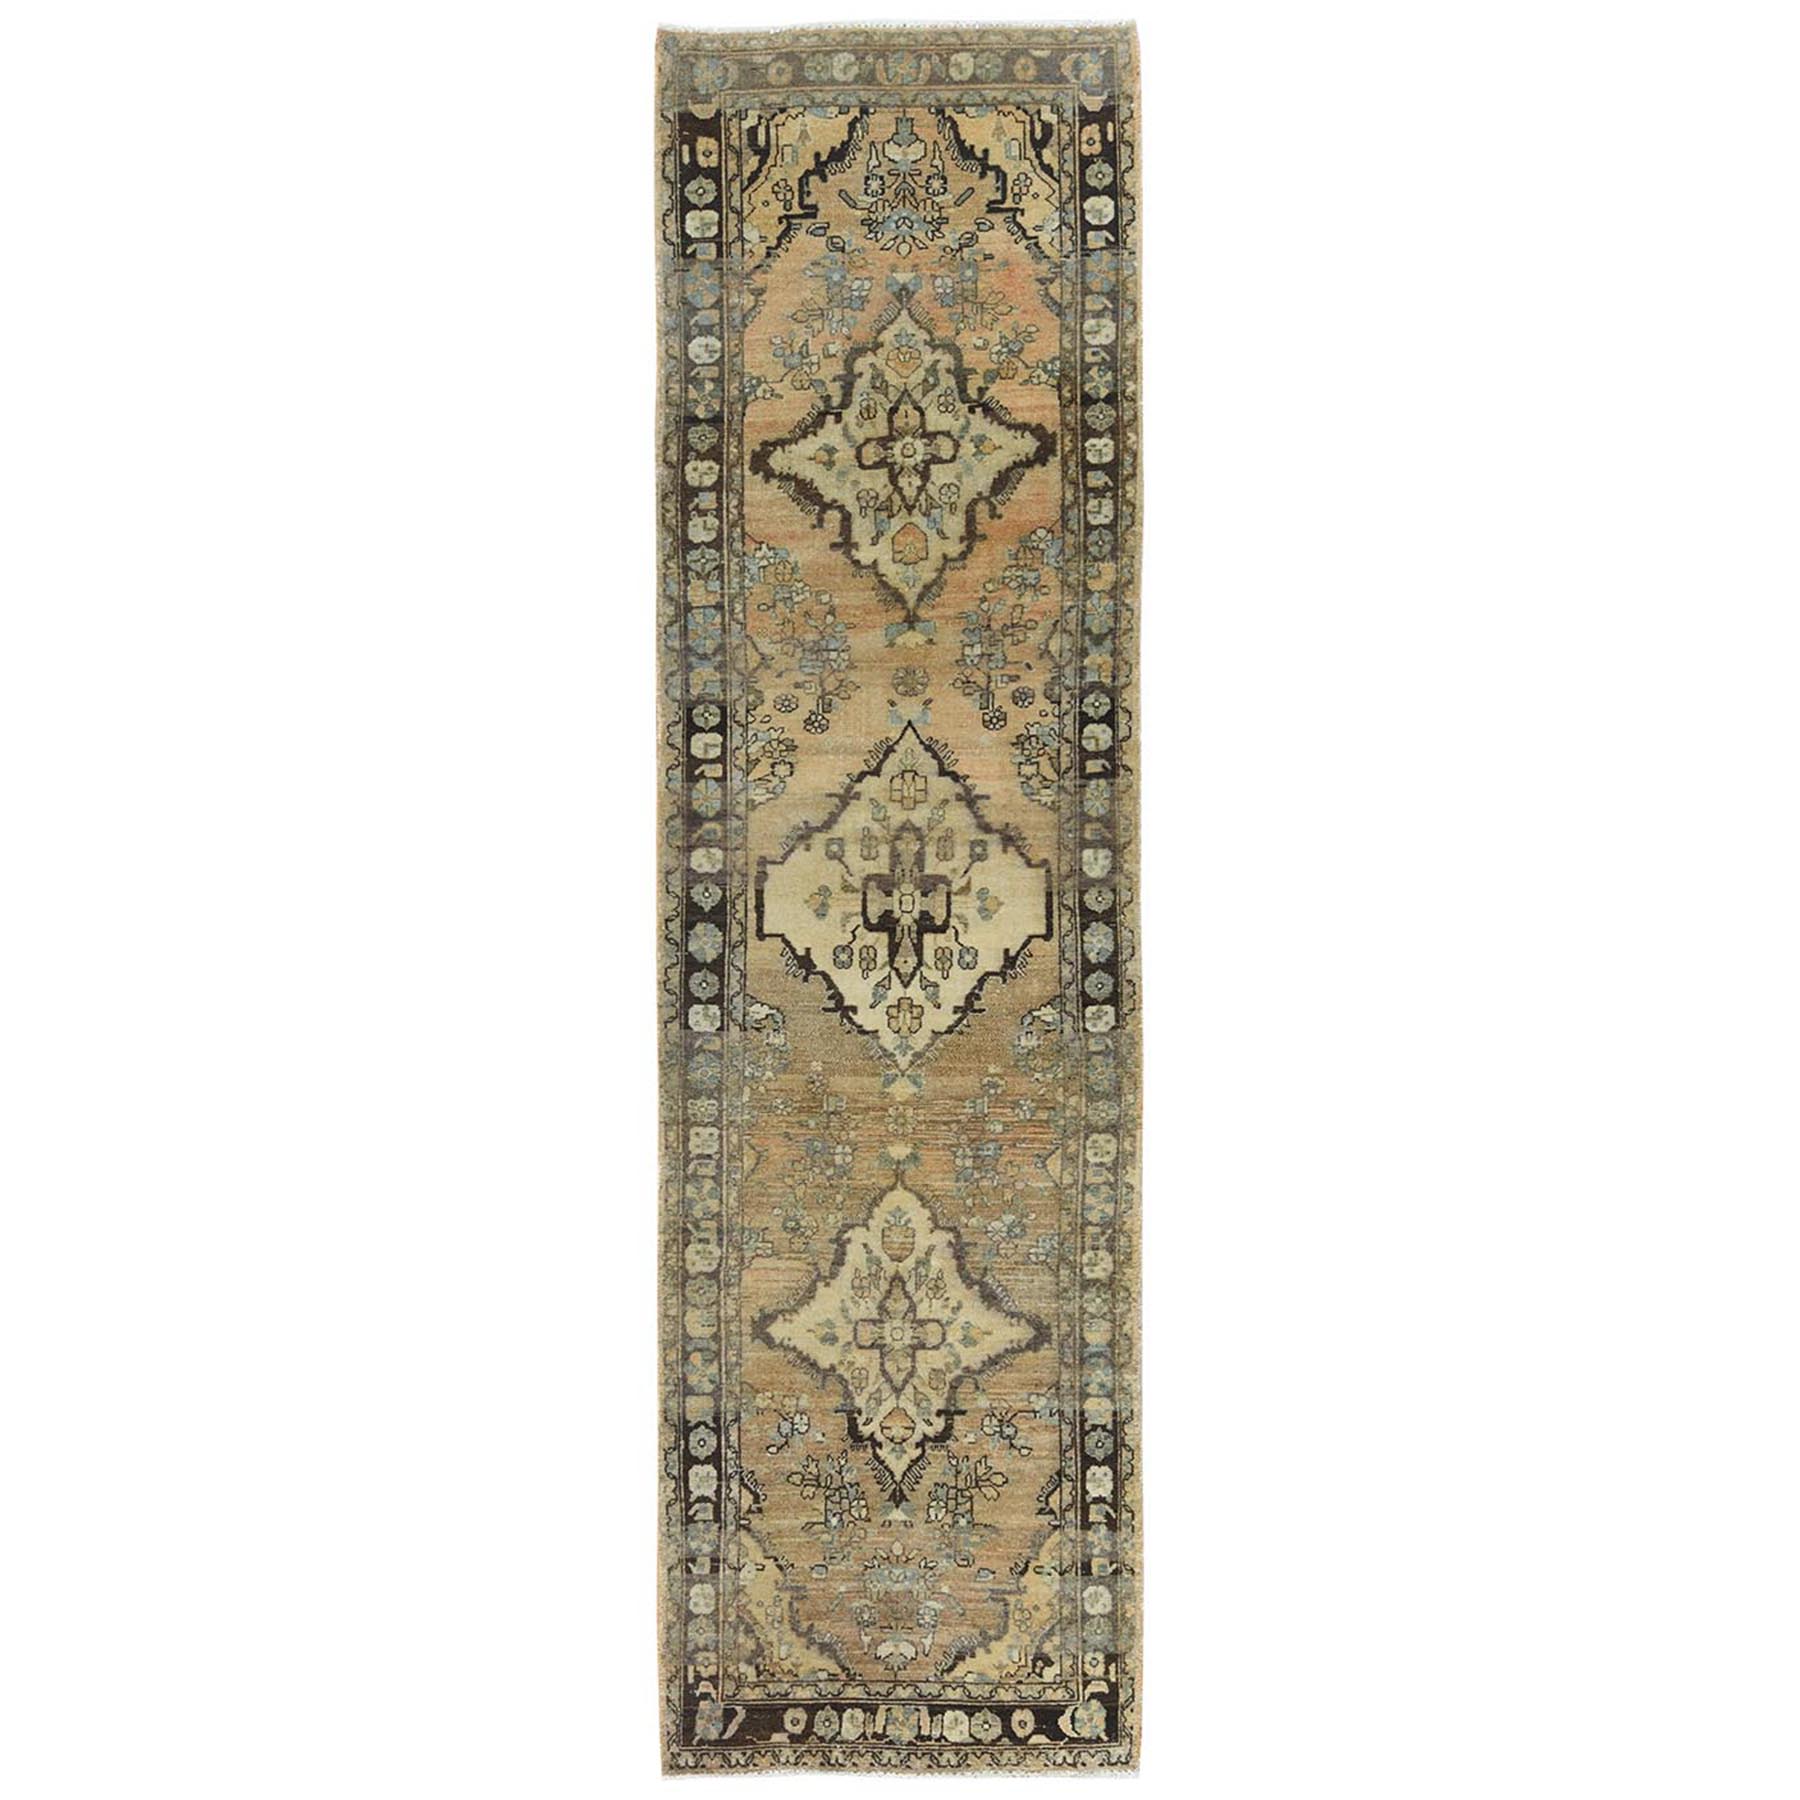  Wool Hand-Knotted Area Rug 3'7